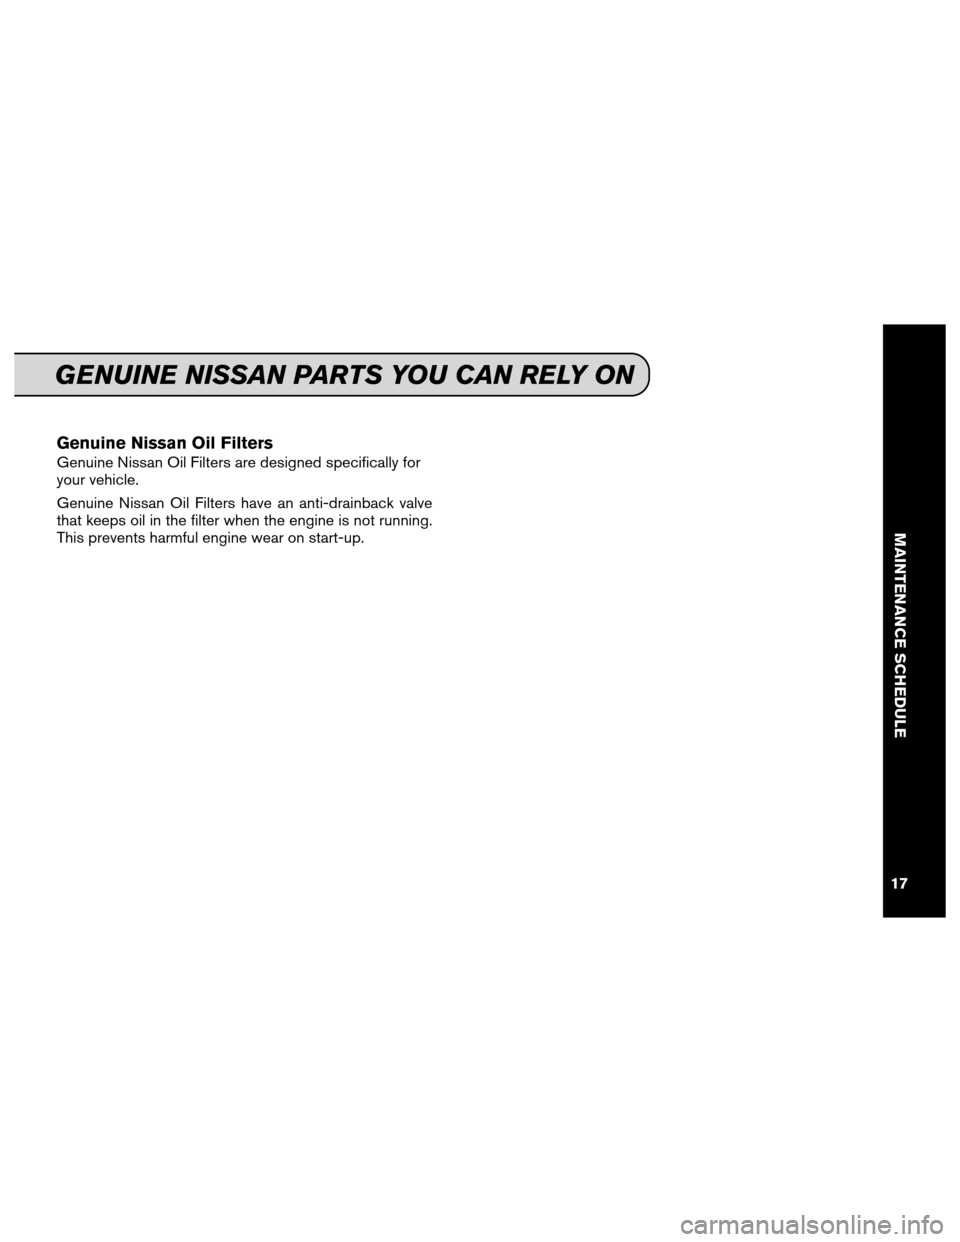 NISSAN ARMADA 2013 1.G Service And Maintenance Guide Genuine Nissan Oil Filters
Genuine Nissan Oil Filters are designed specifically for
your vehicle.
Genuine Nissan Oil Filters have an anti-drainback valve
that keeps oil in the filter when the engine i